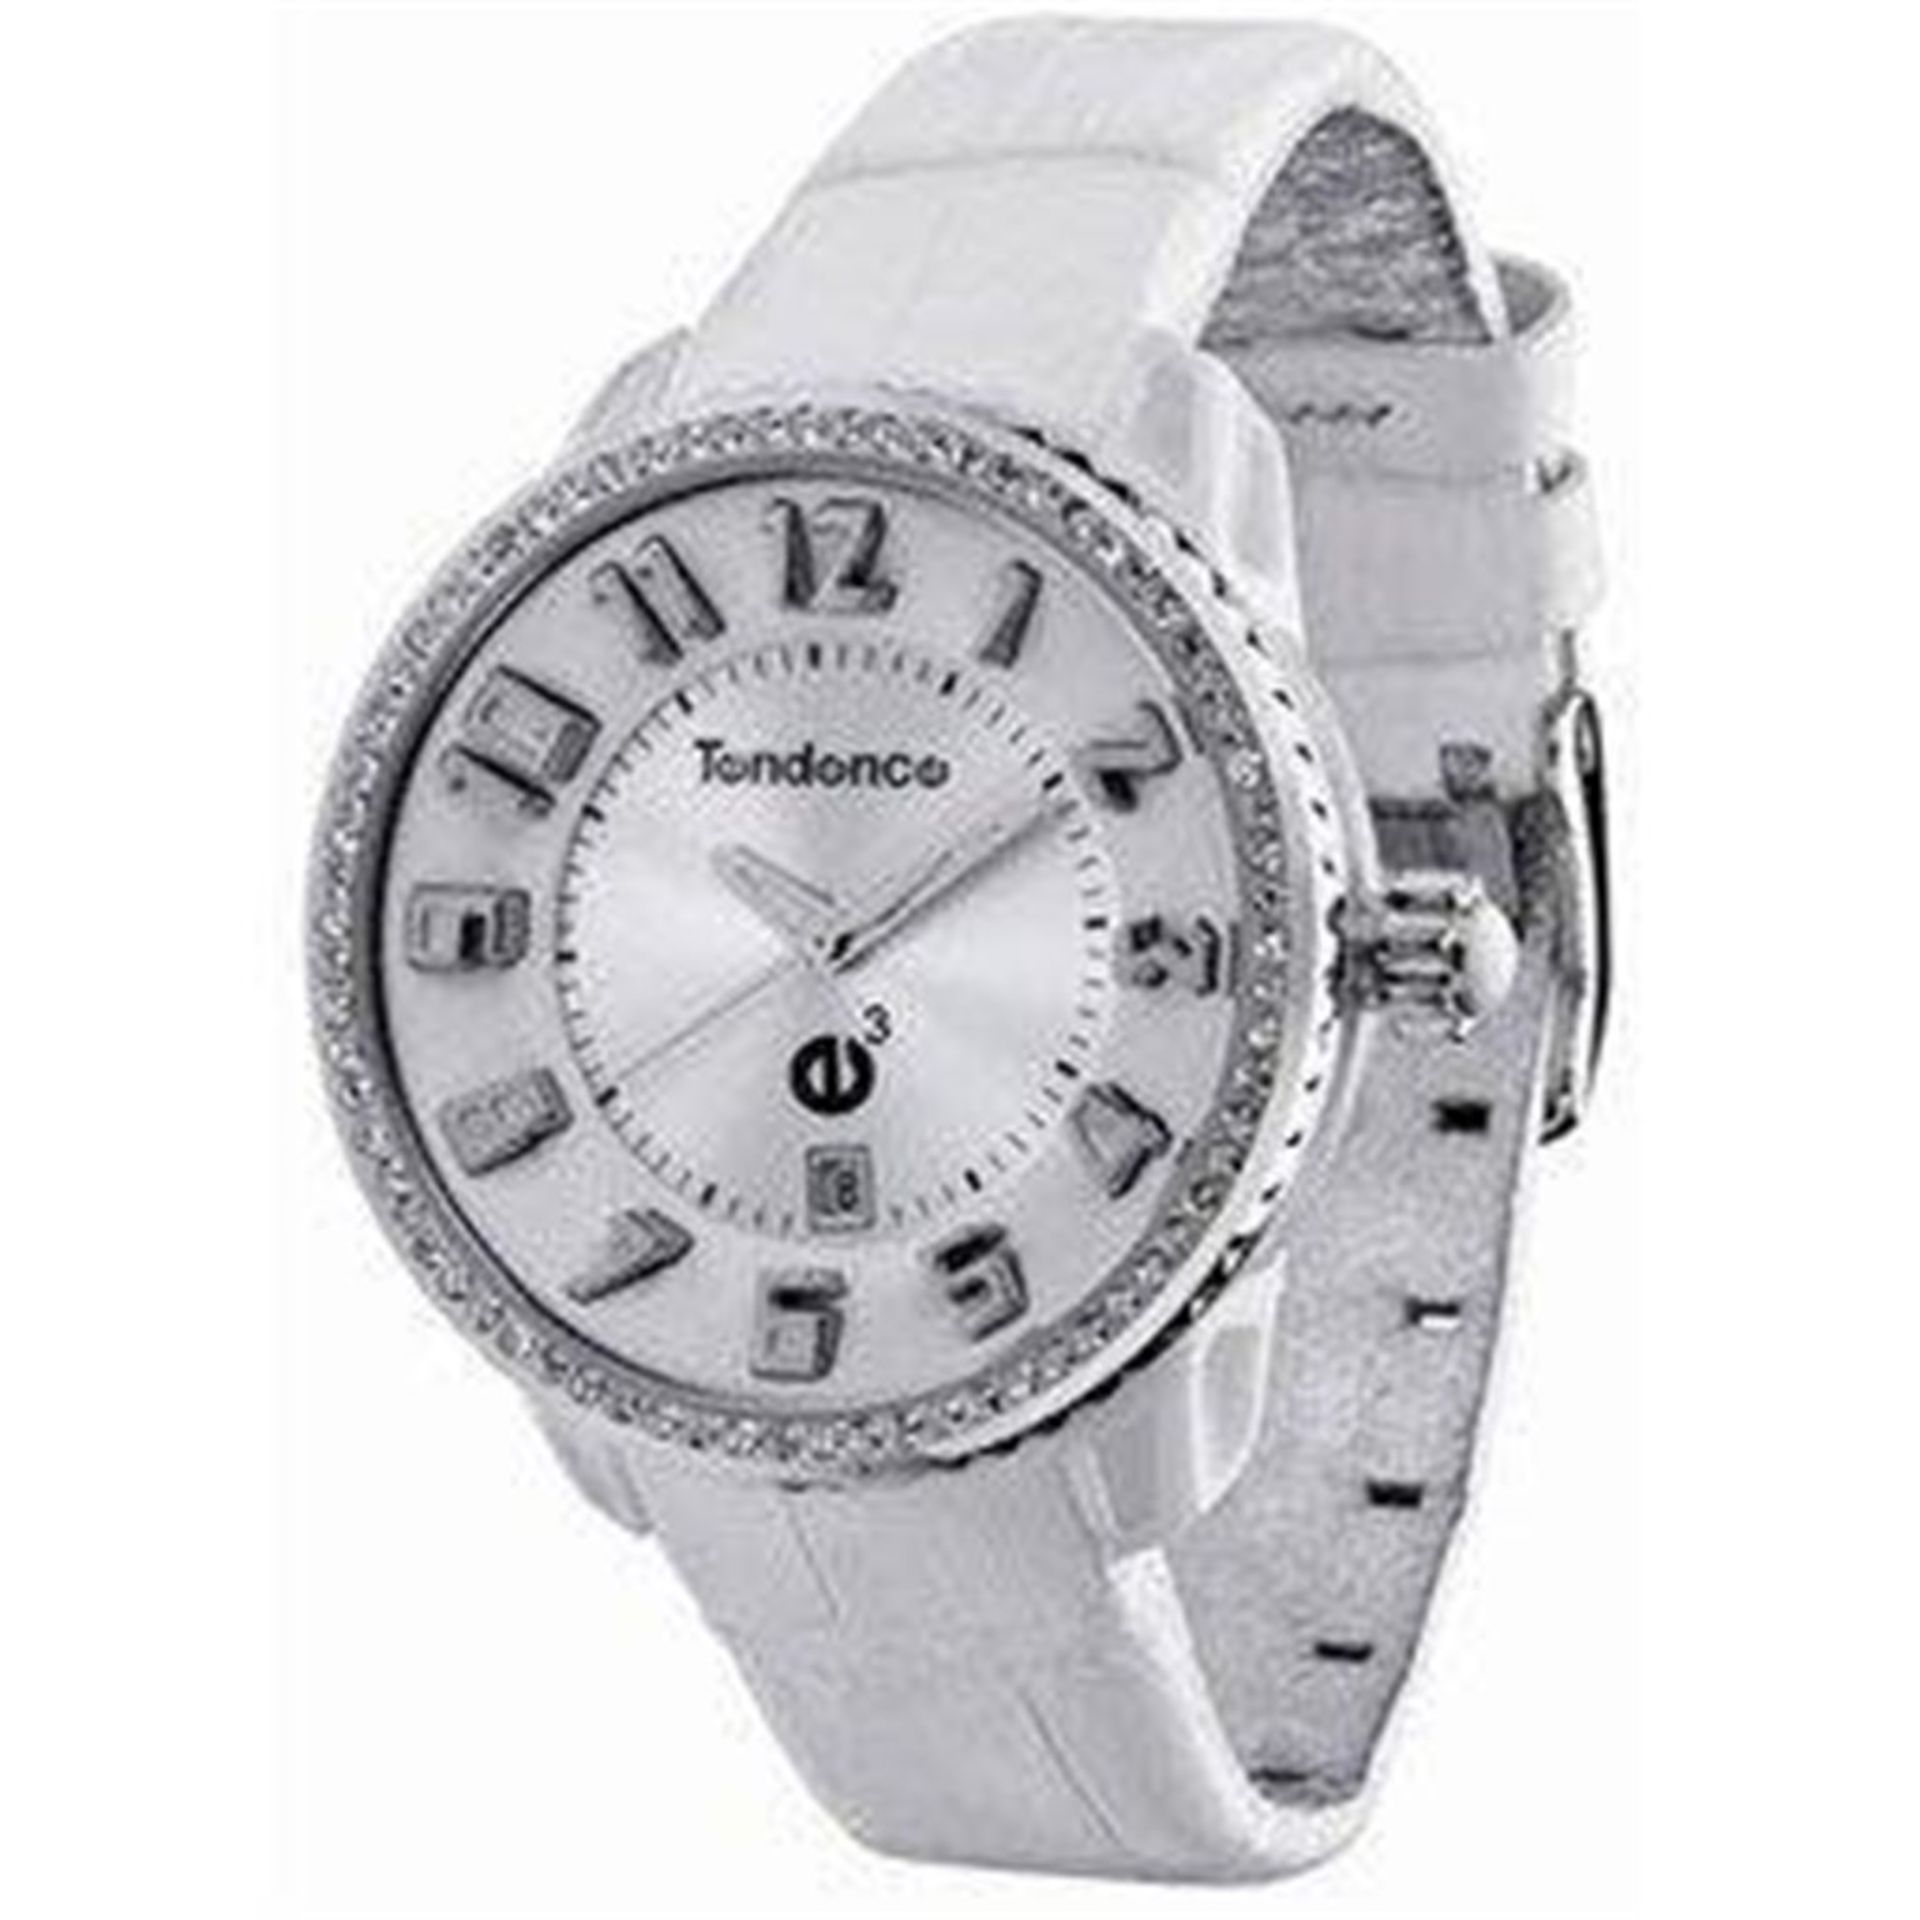 Tendence Gulliver Medium - Stones Women's Quartz Watch with Silver Dial Analogue Display